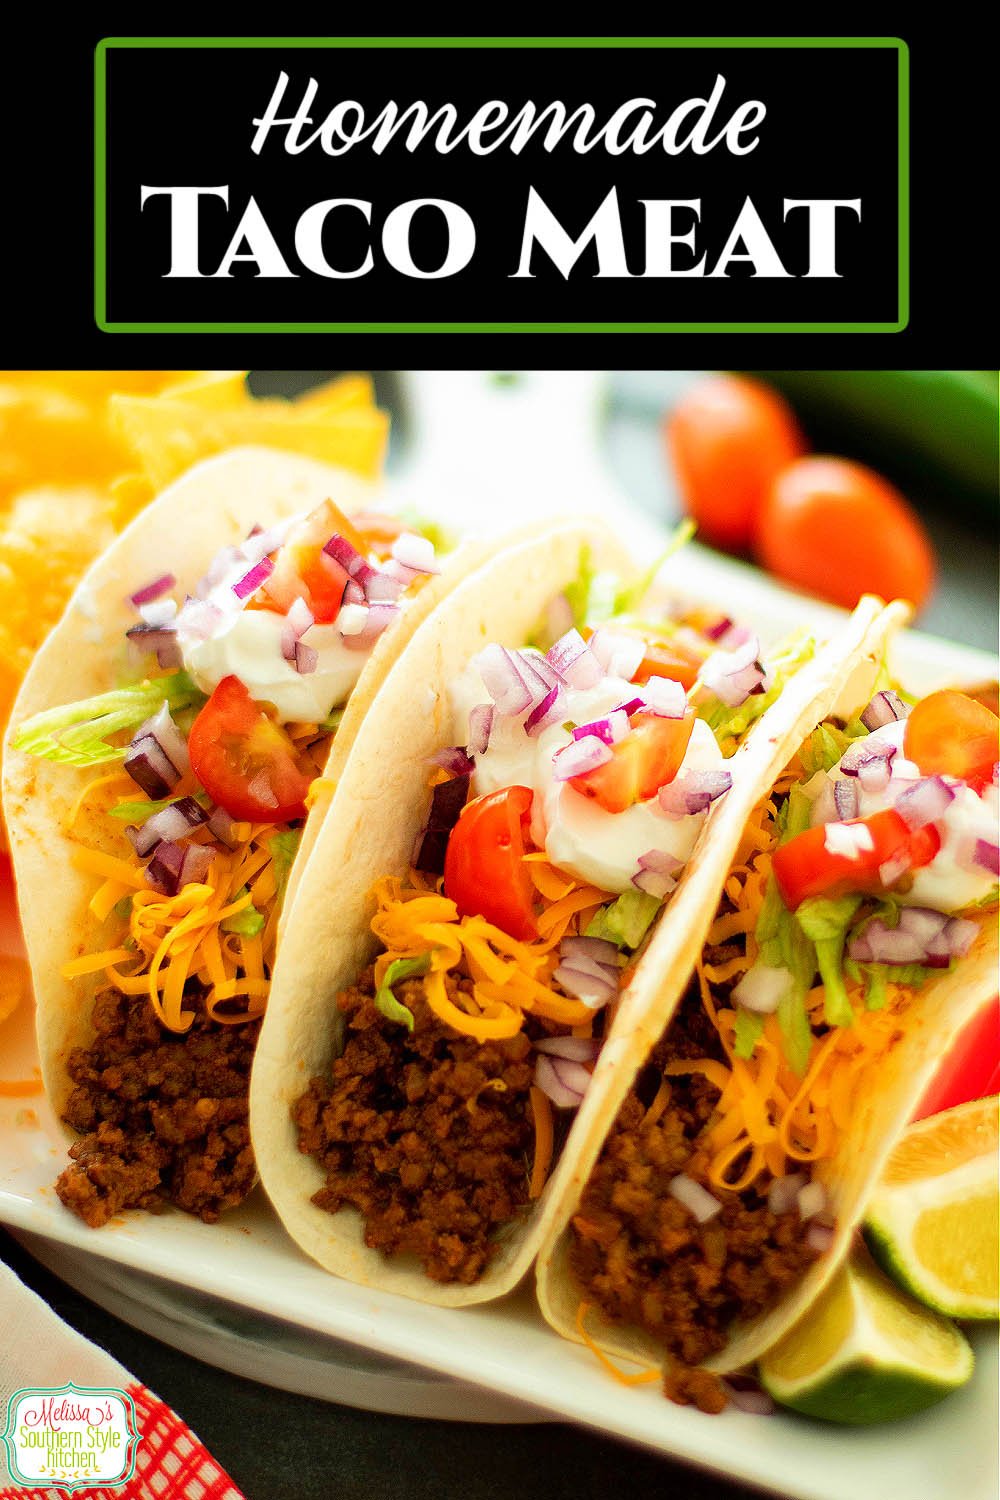 Make your own delicious Taco Meat for your next homestyle fiesta! #tacos #tacomeat #easygroundbeefrecipes #beef #mexicanfood #easyrecipes #beefrecipes